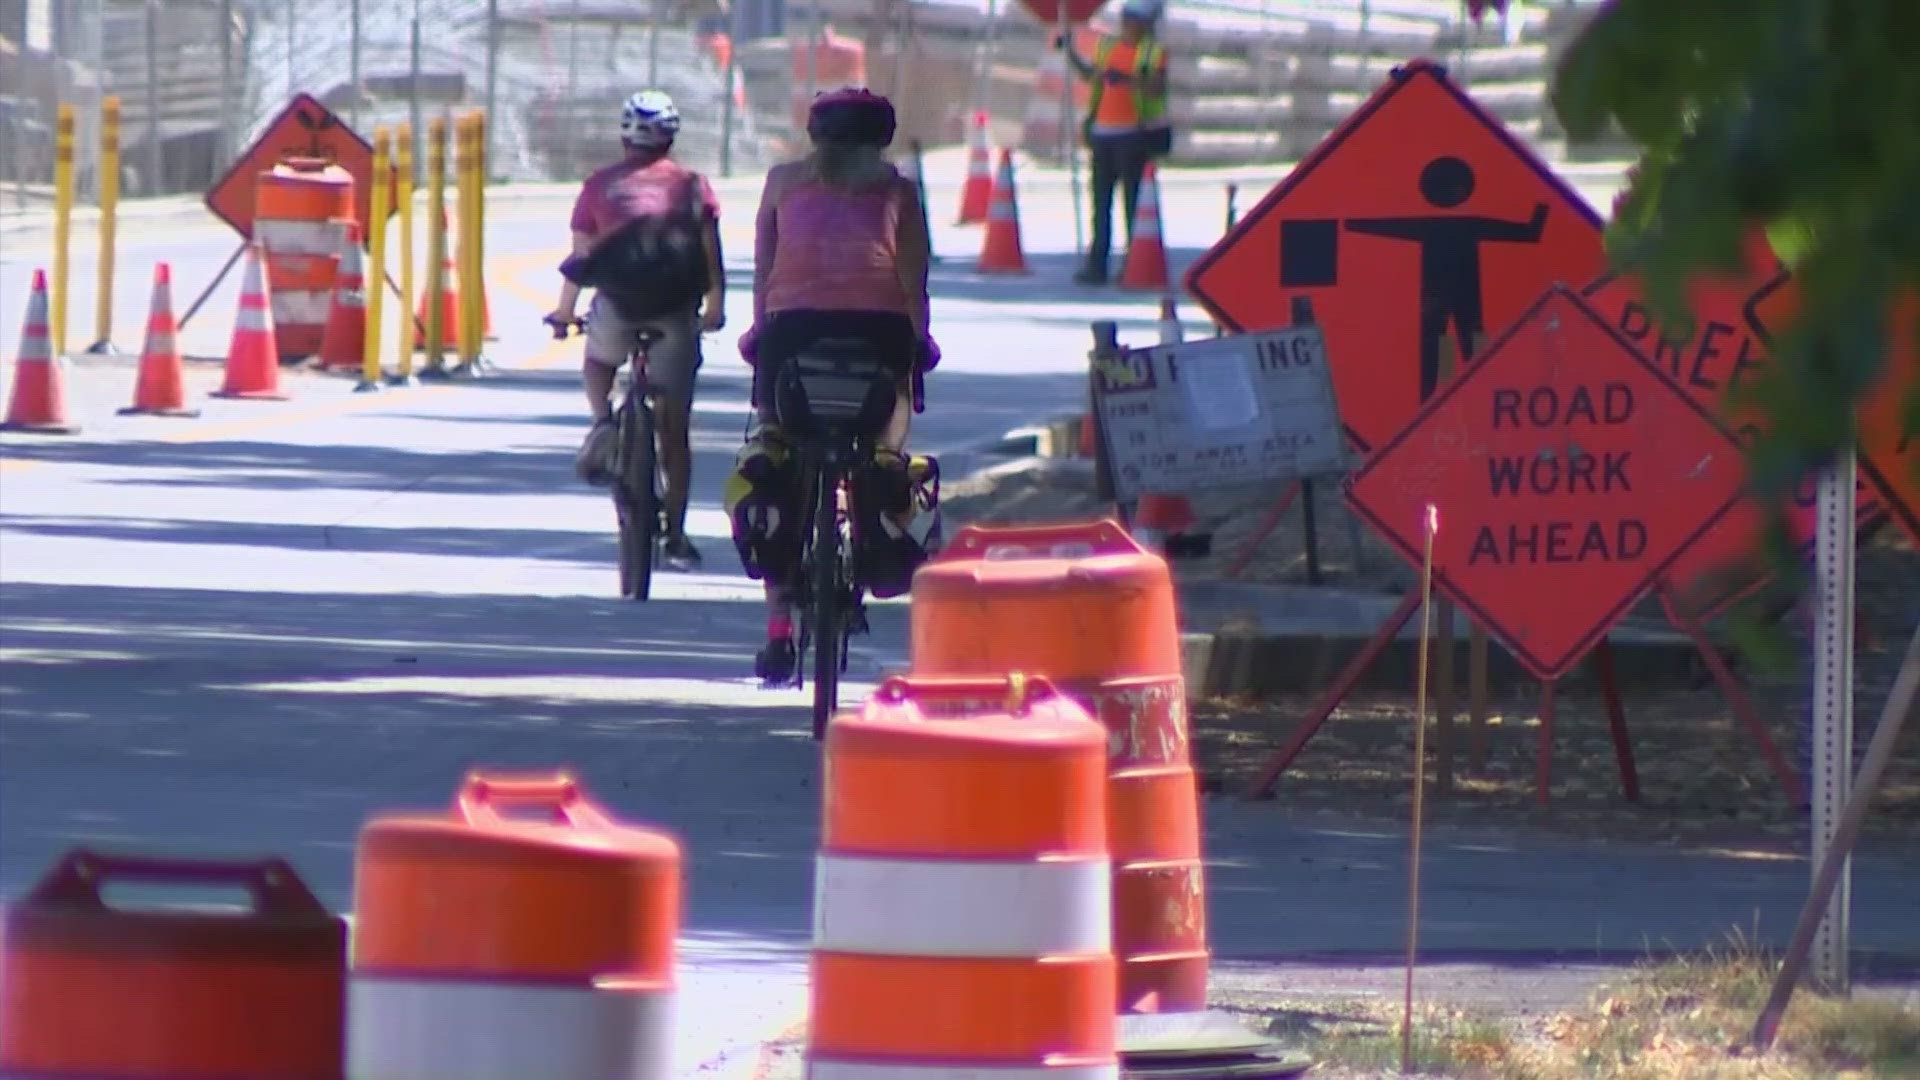 Travelers looking to use SR 520 might experience some delays over the next few weekends.